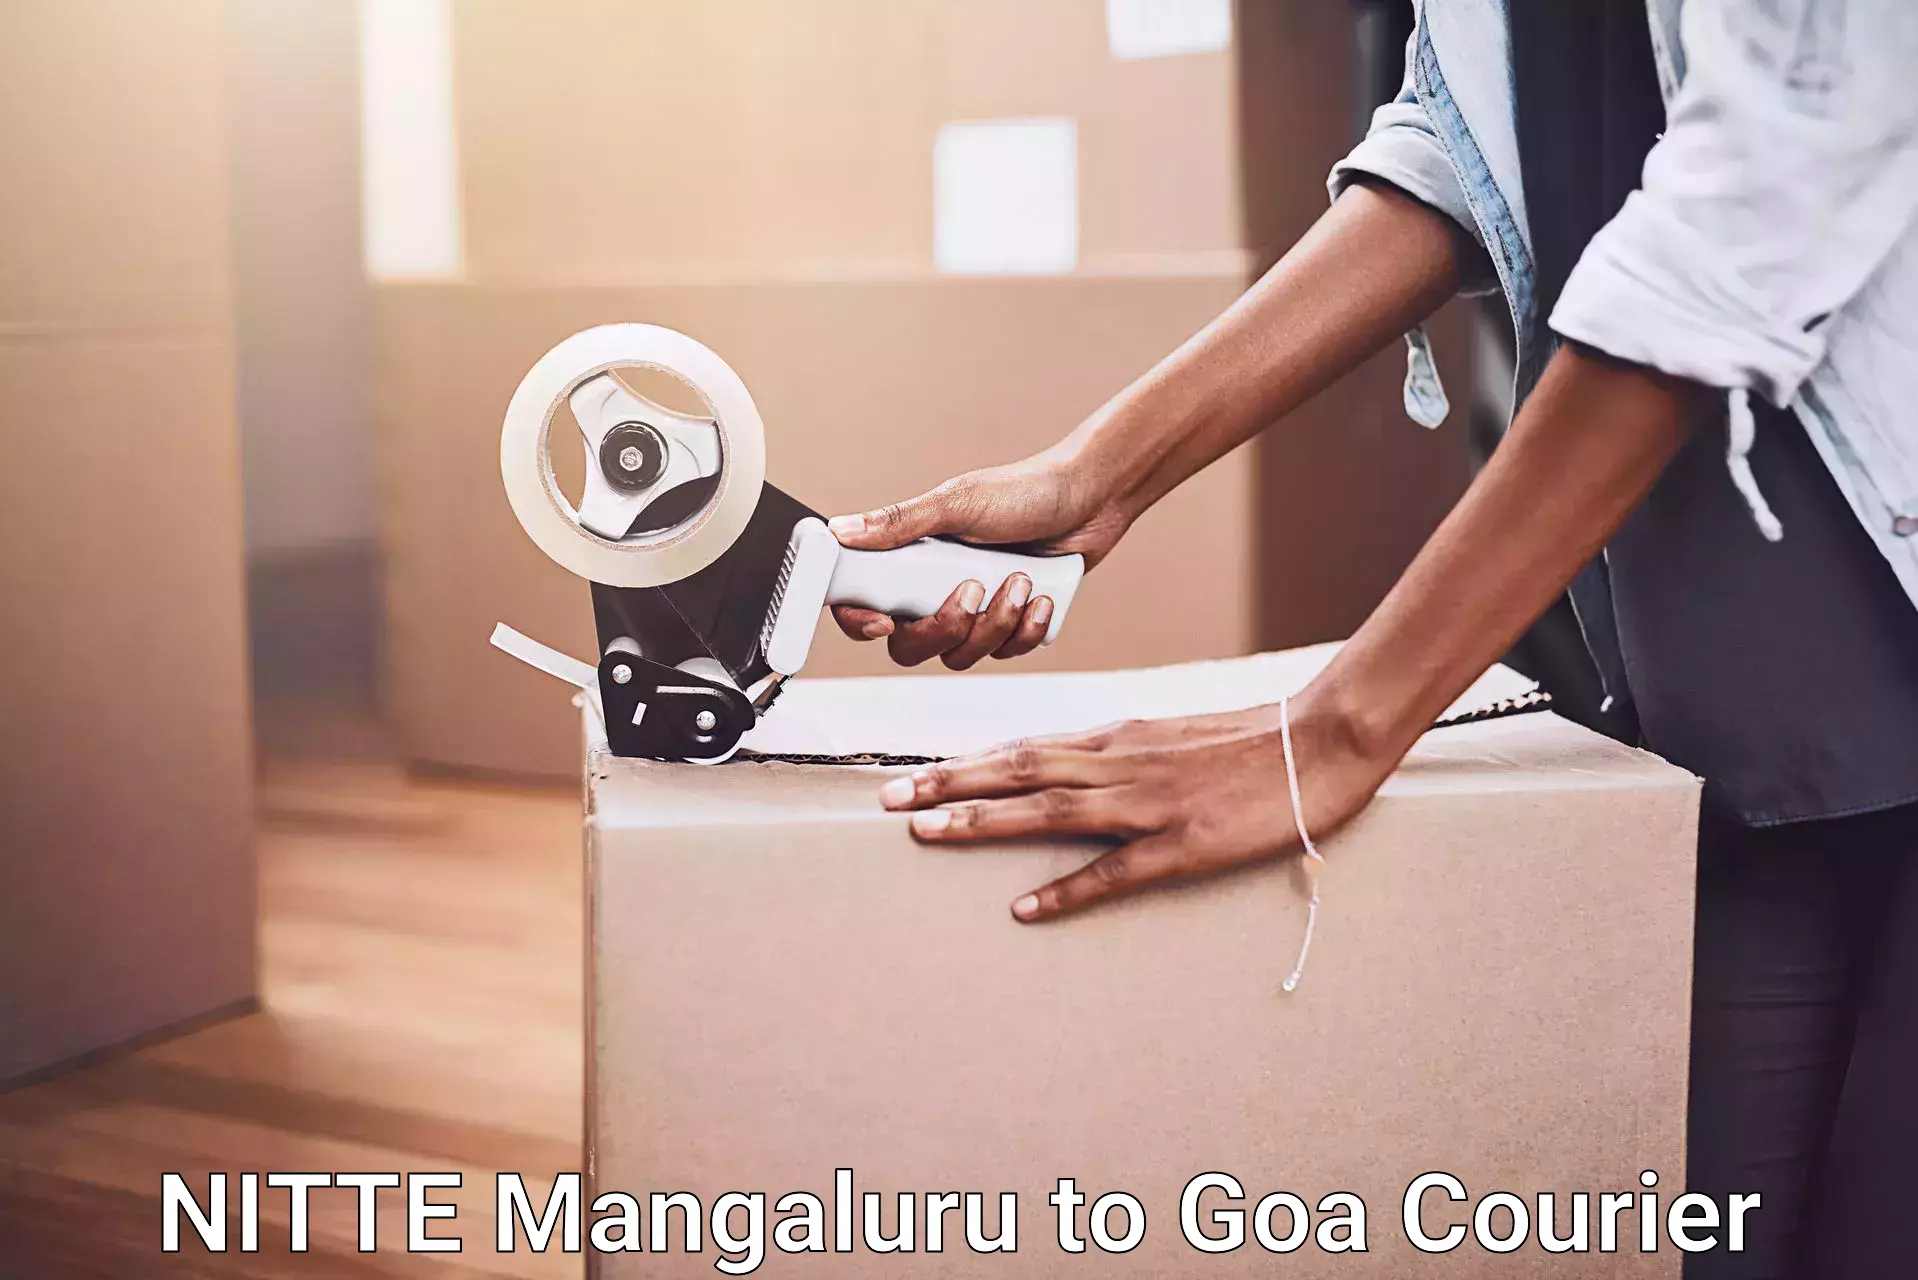 Moving service excellence NITTE Mangaluru to IIT Goa